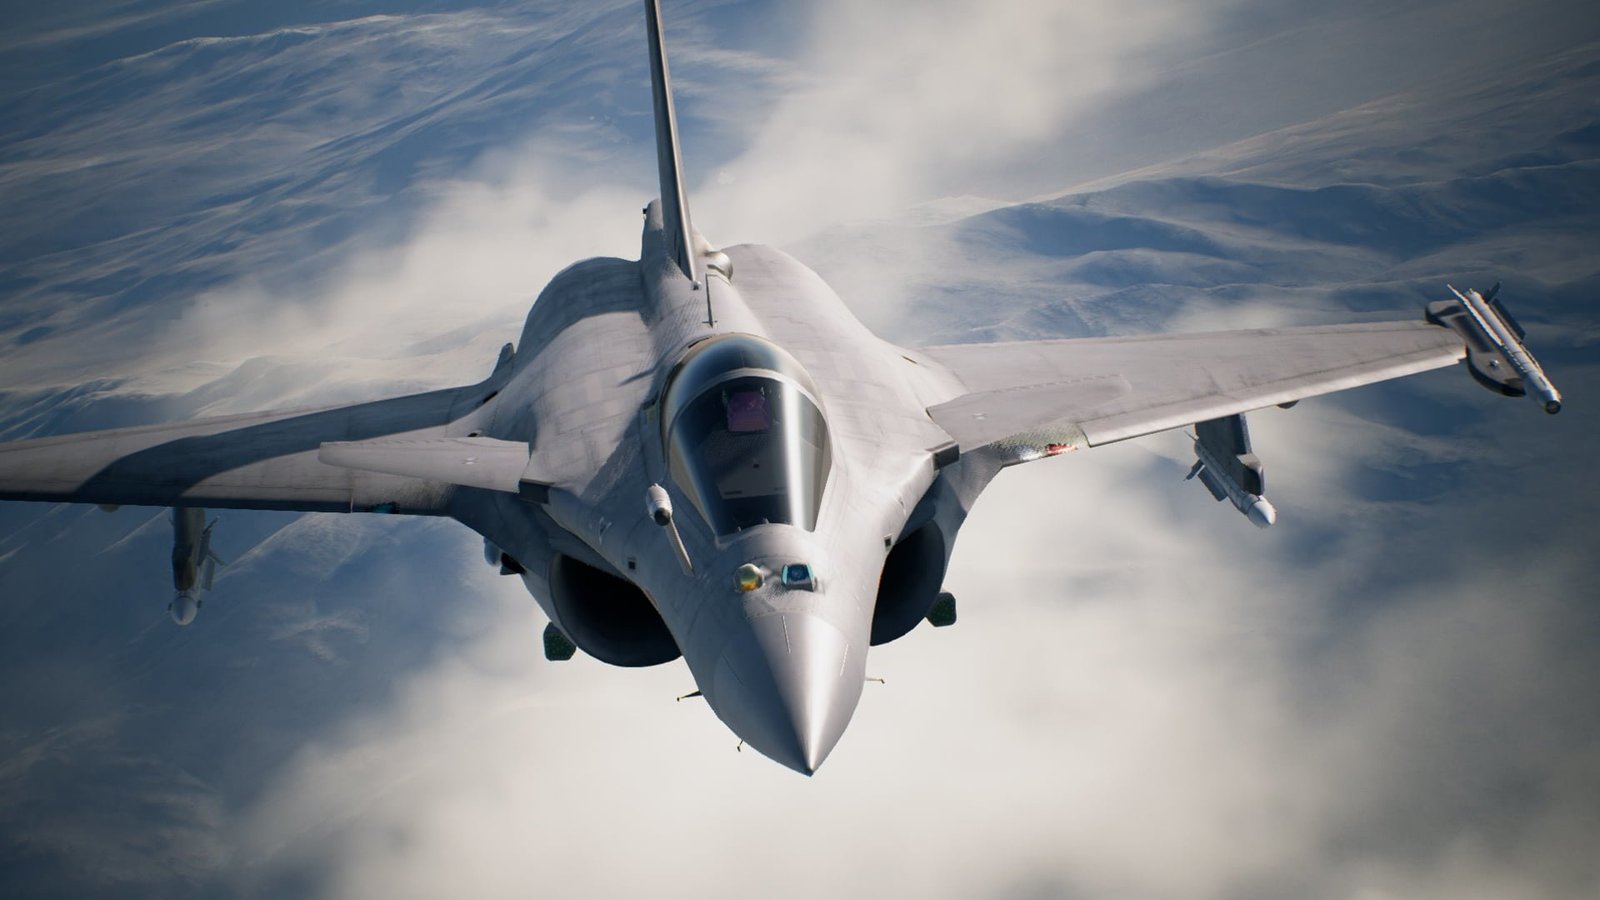 Review – Ace Combat 7: Skies Unknown